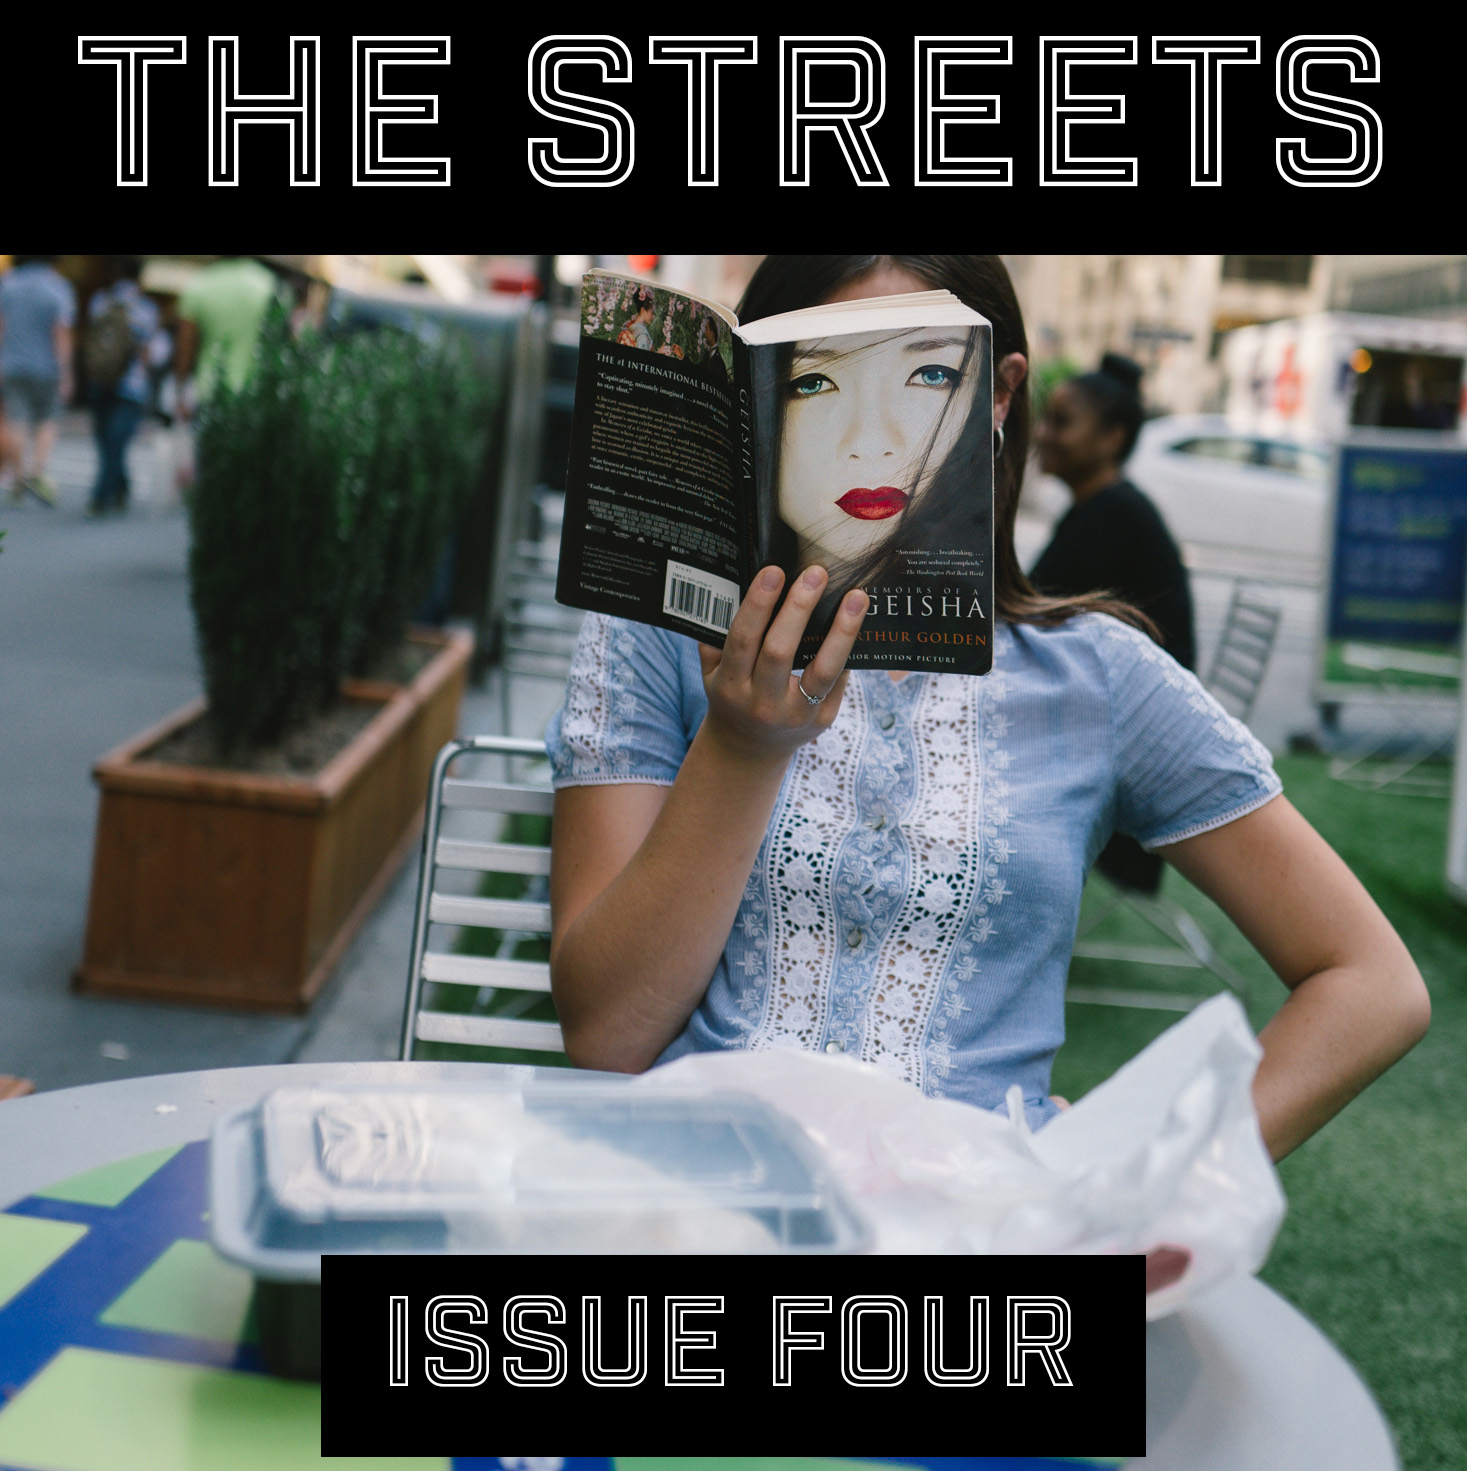 THE STREETS - Issue Four